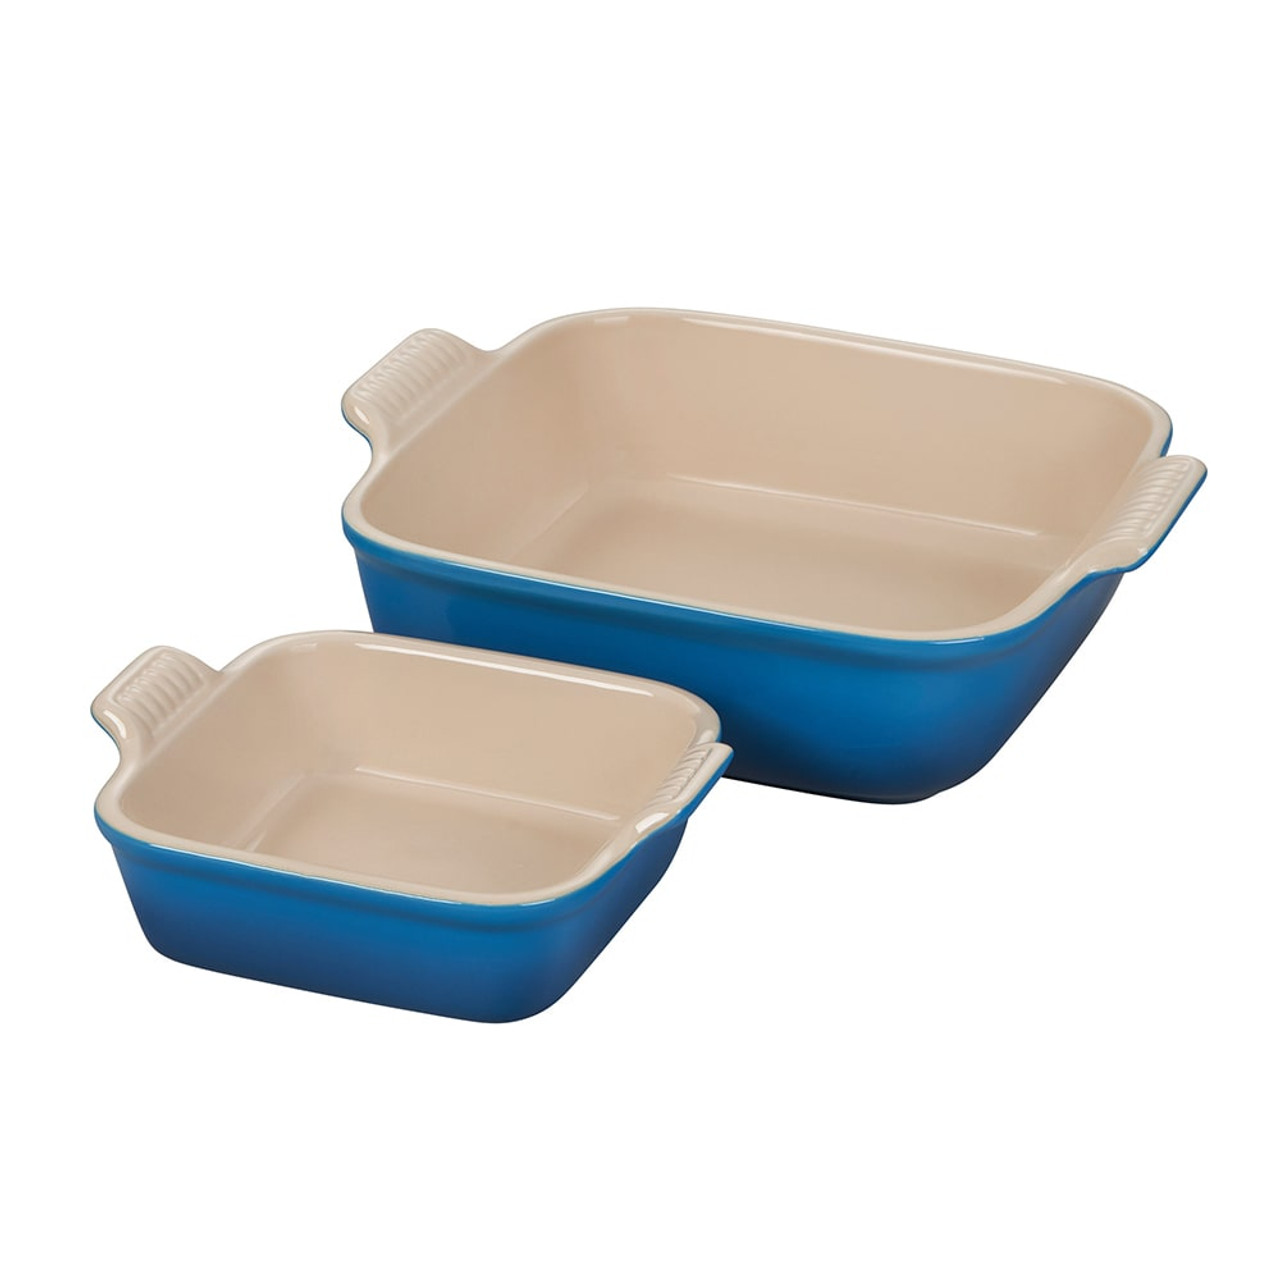 Le Creuset Heritage Square Baking Dish, Stoneware, 7 Colors on Food52